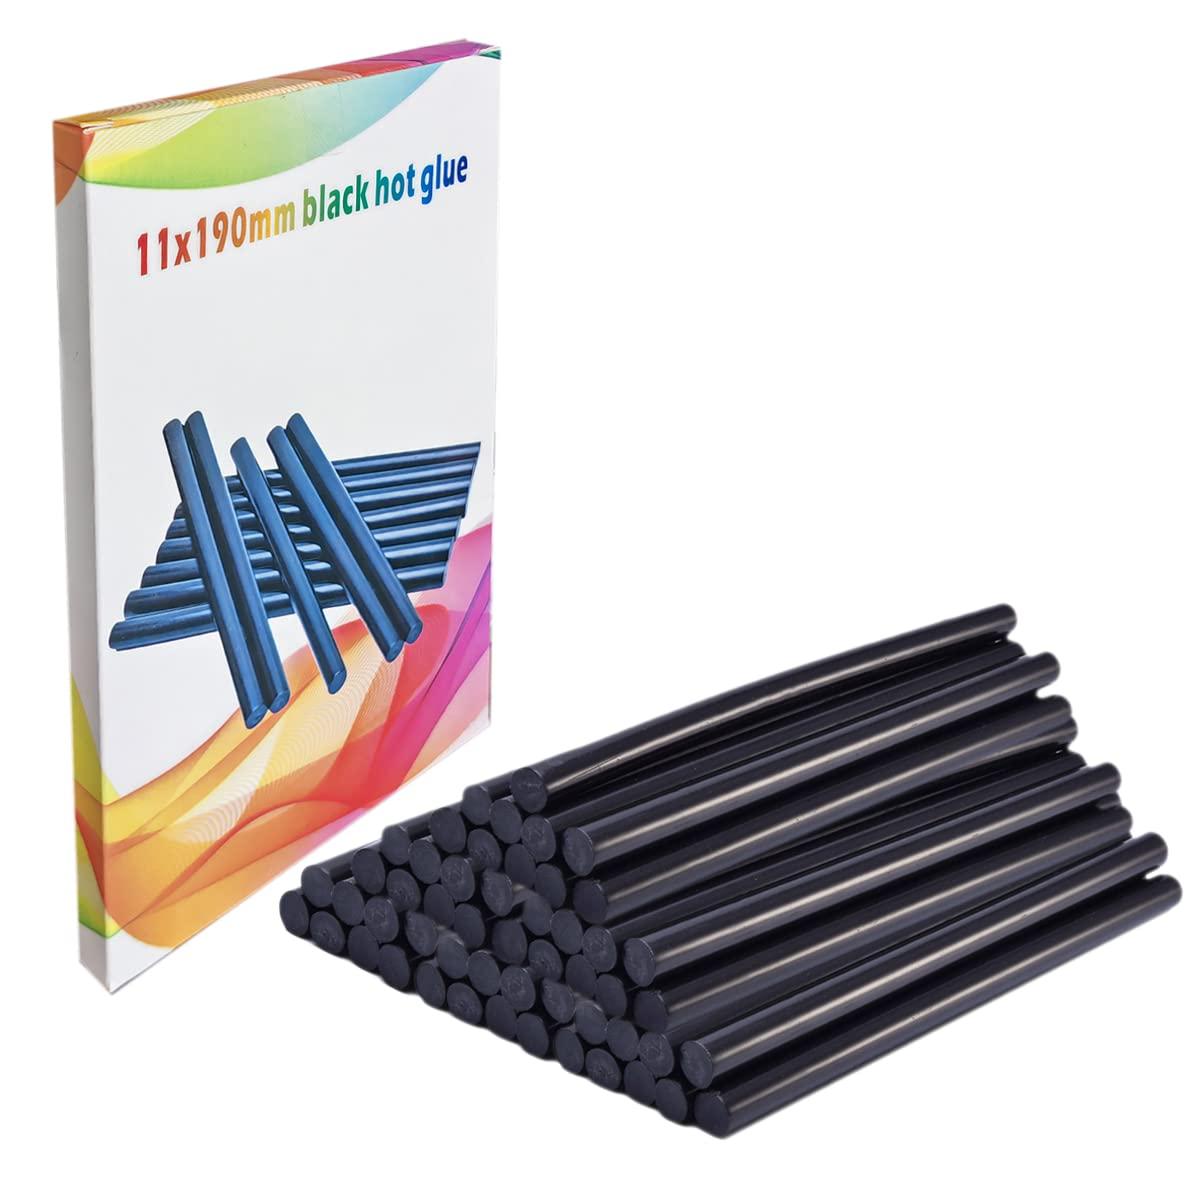 10 Hot Glue Sticks in black  Steckerform.de - molds to isolate your MPX  plugs